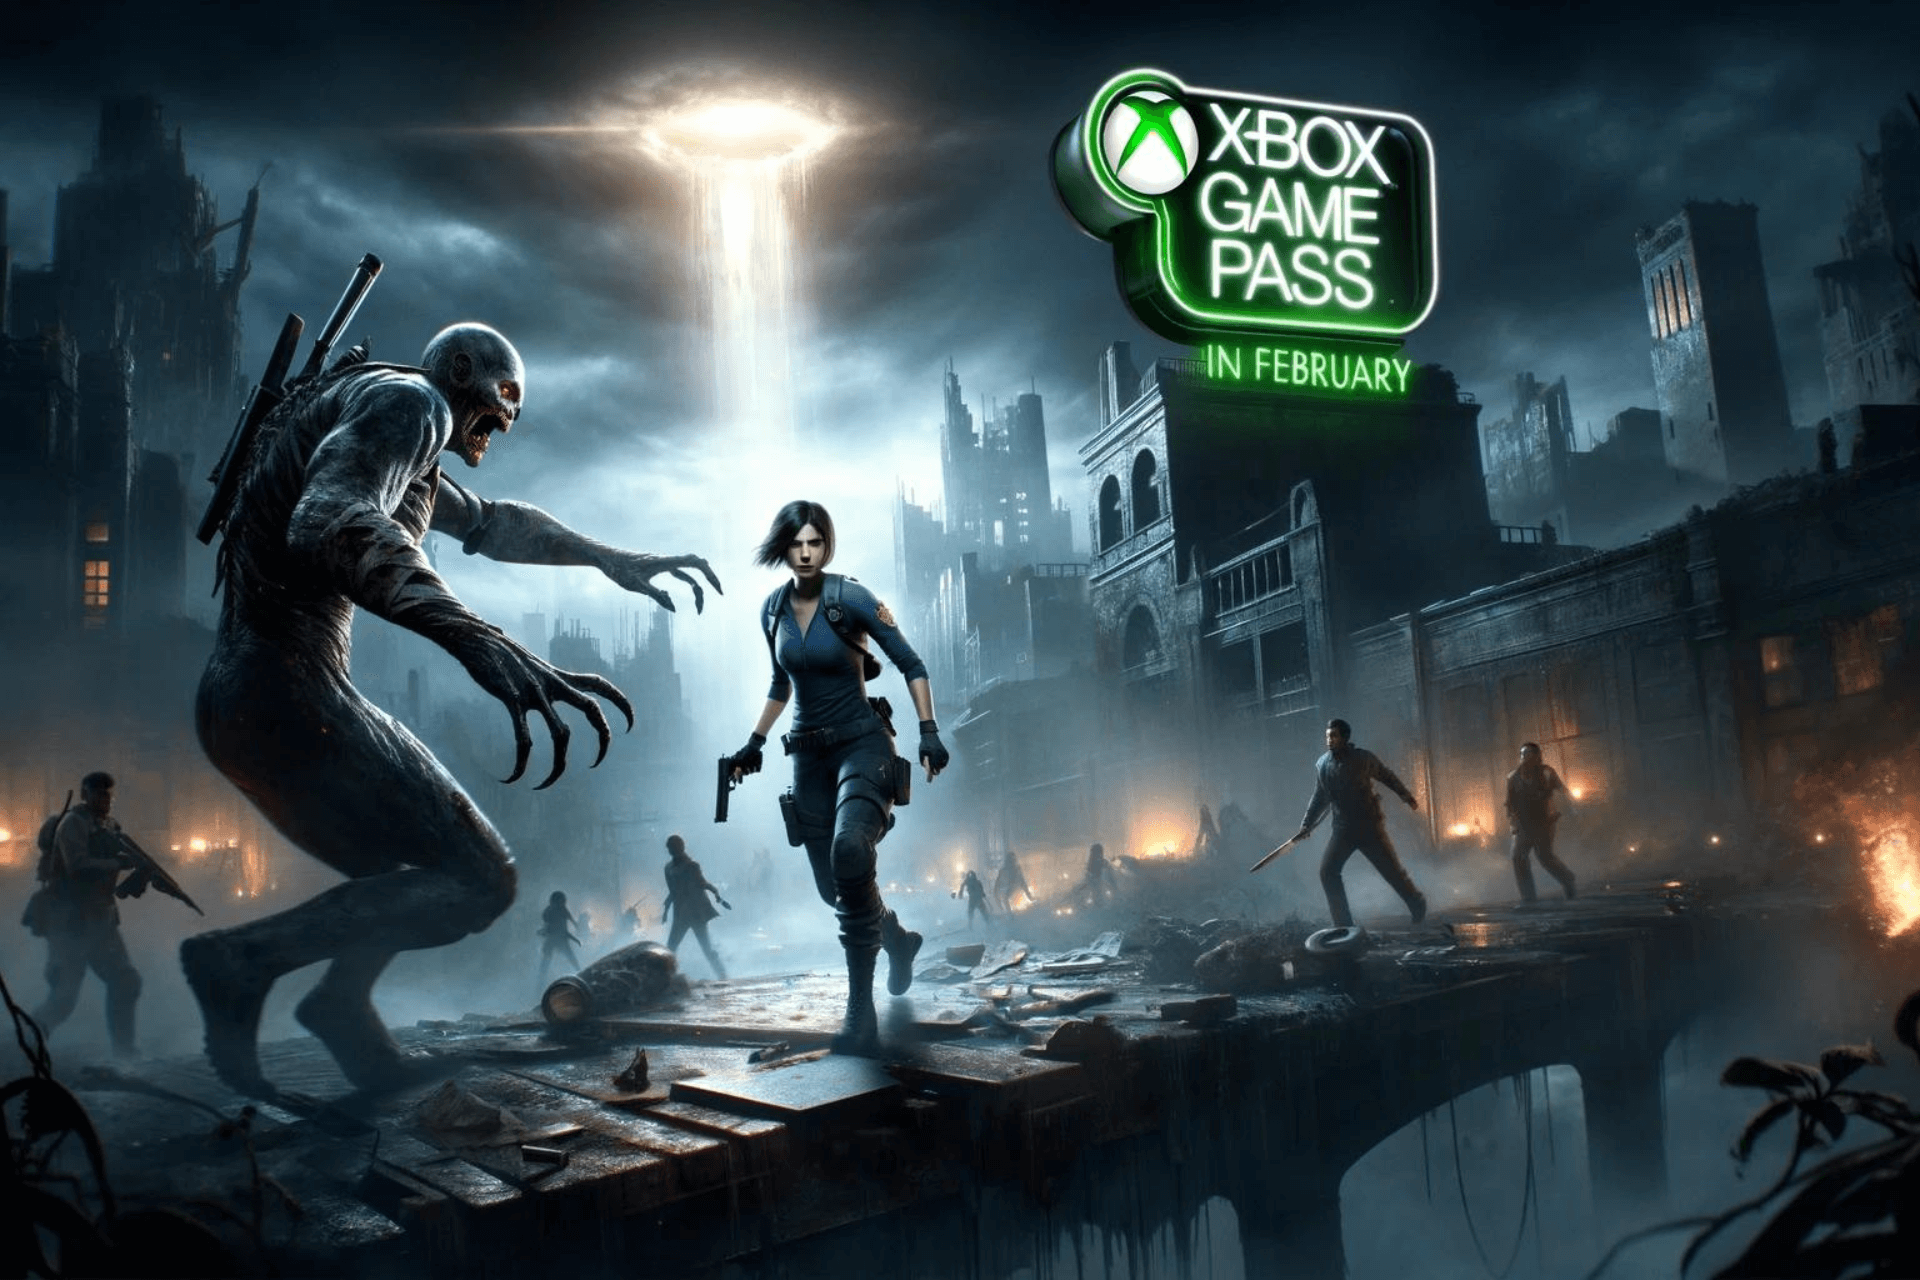 Resident Evil 3 making its way to Xbox Game Pass in February